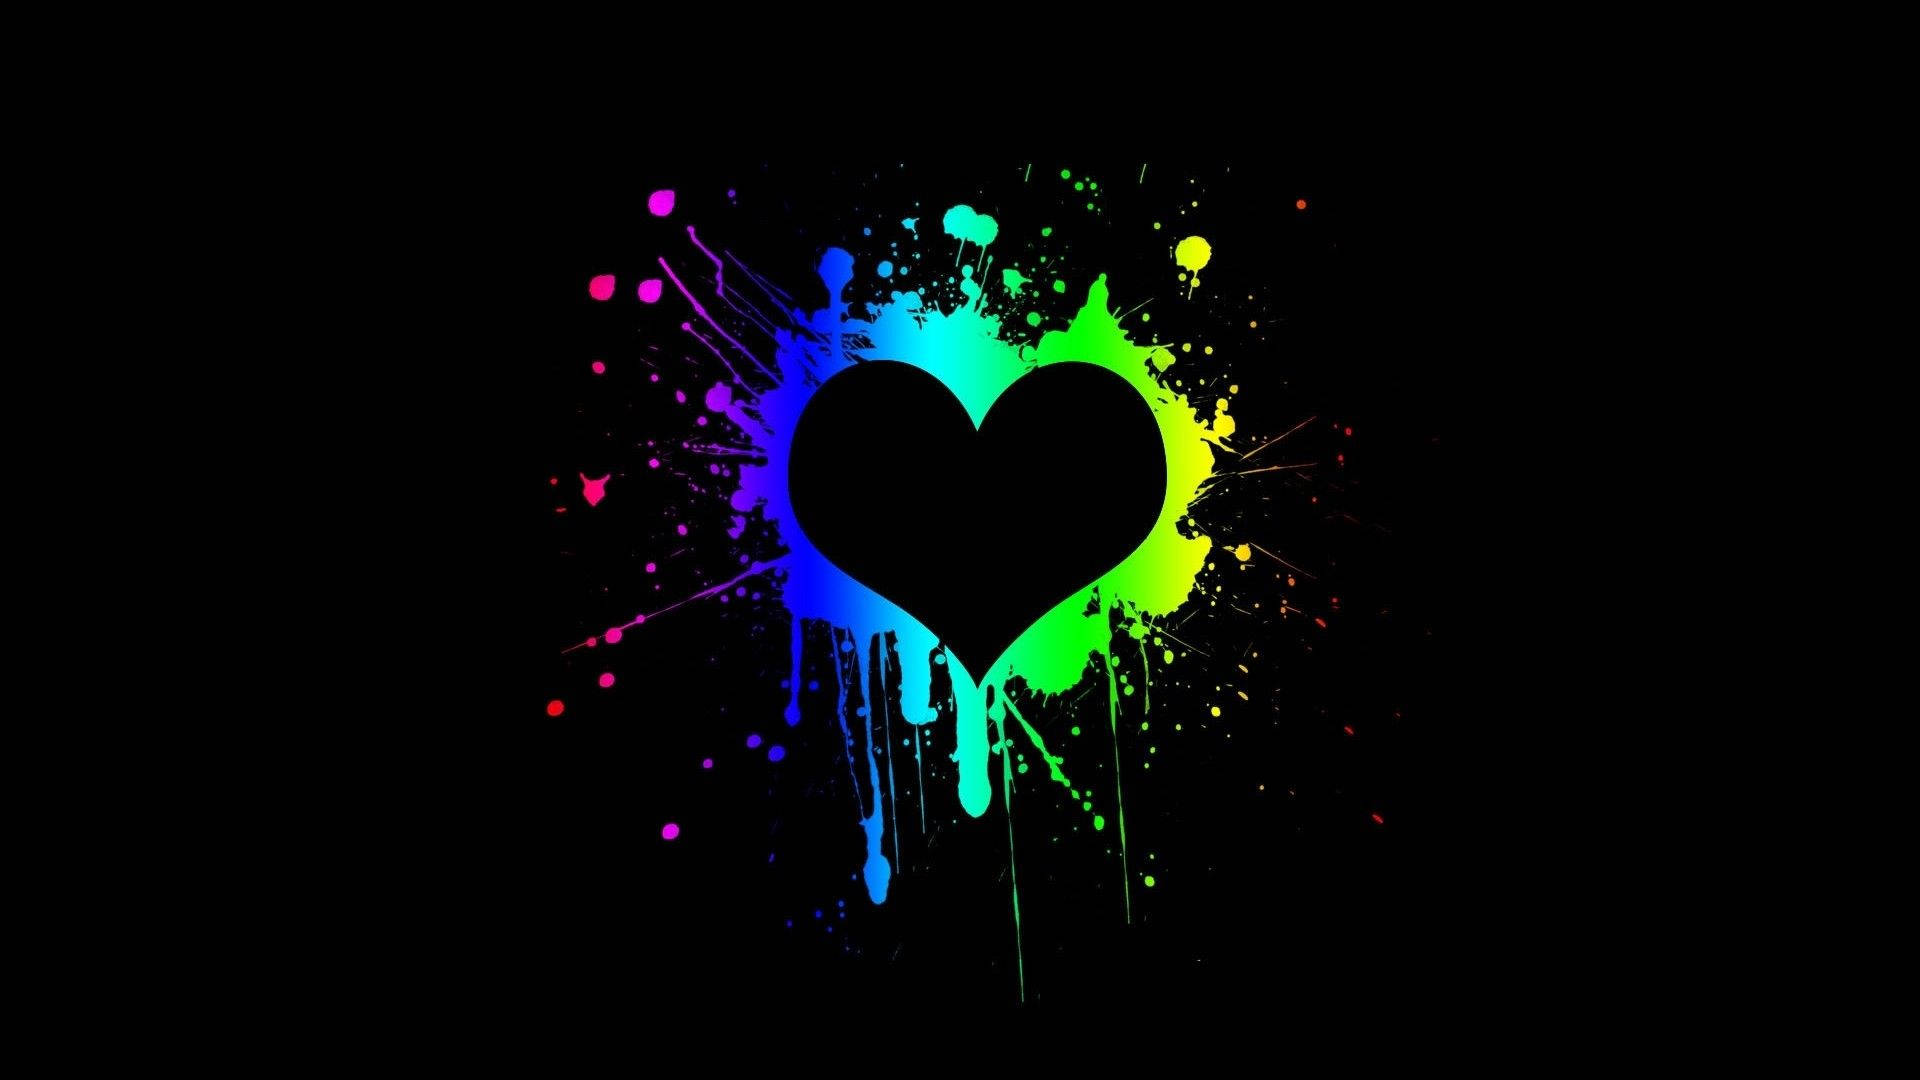 Mysterious Black Heart Imprinted with Paint Splashes Wallpaper